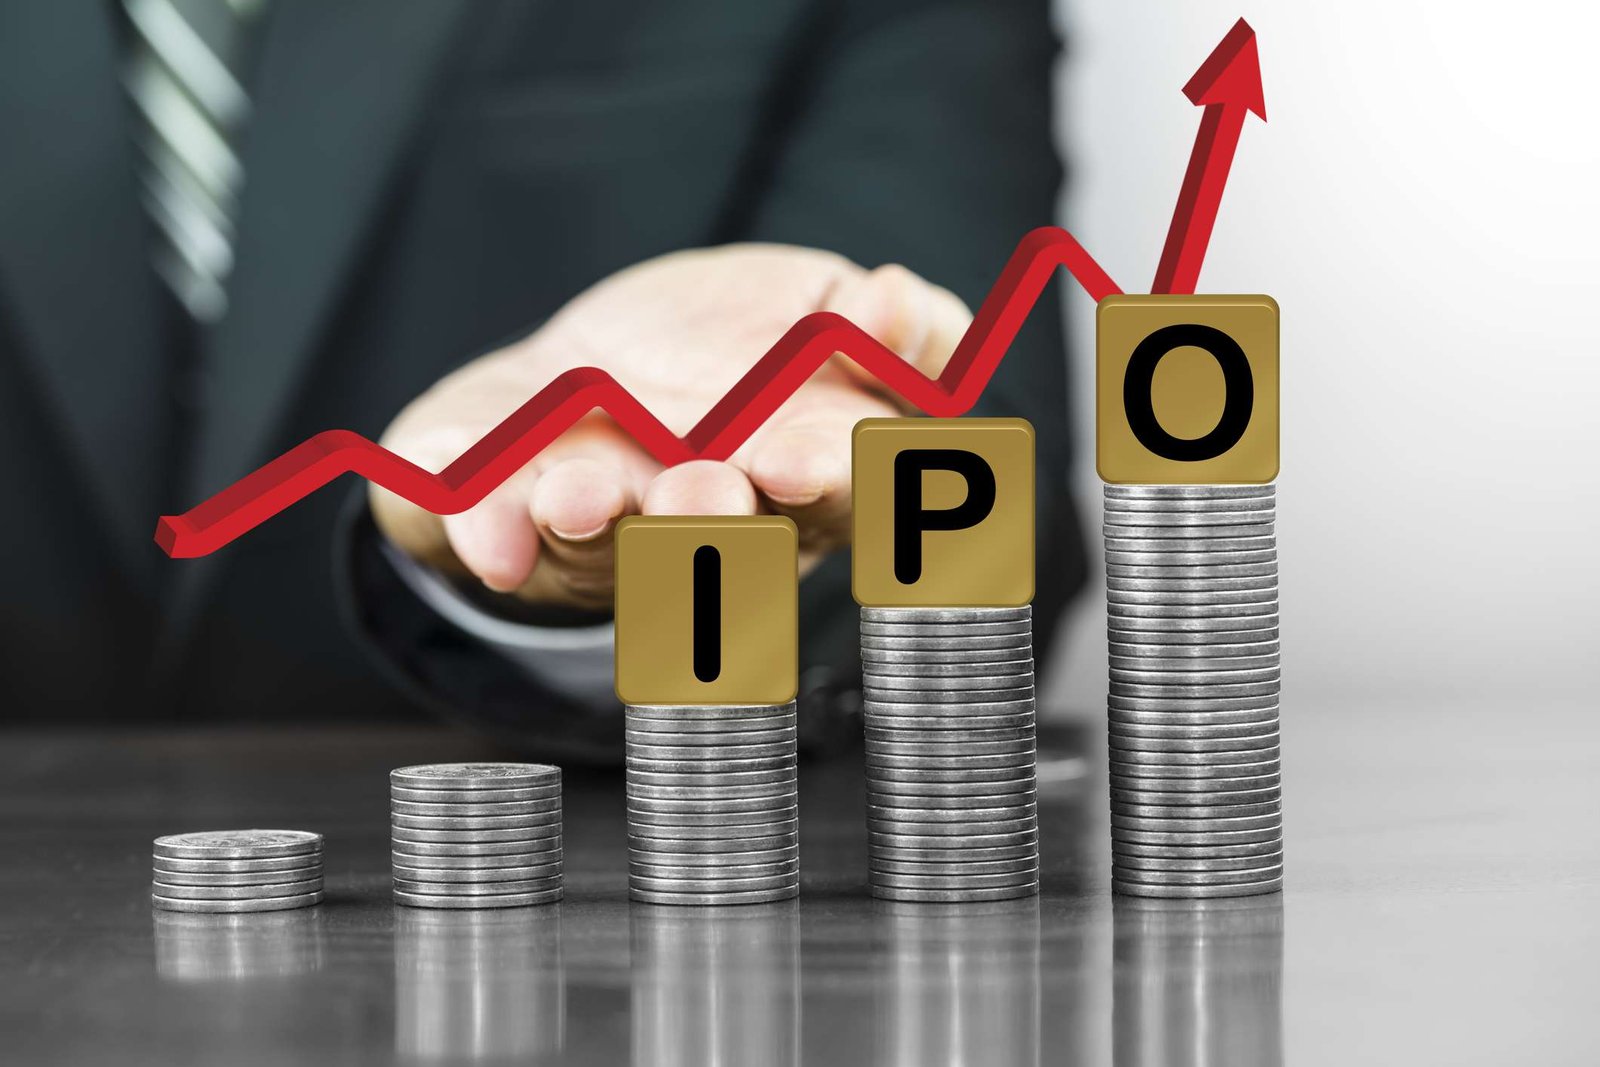 lists at 2.9% premium to IPO price on NSE Emerge